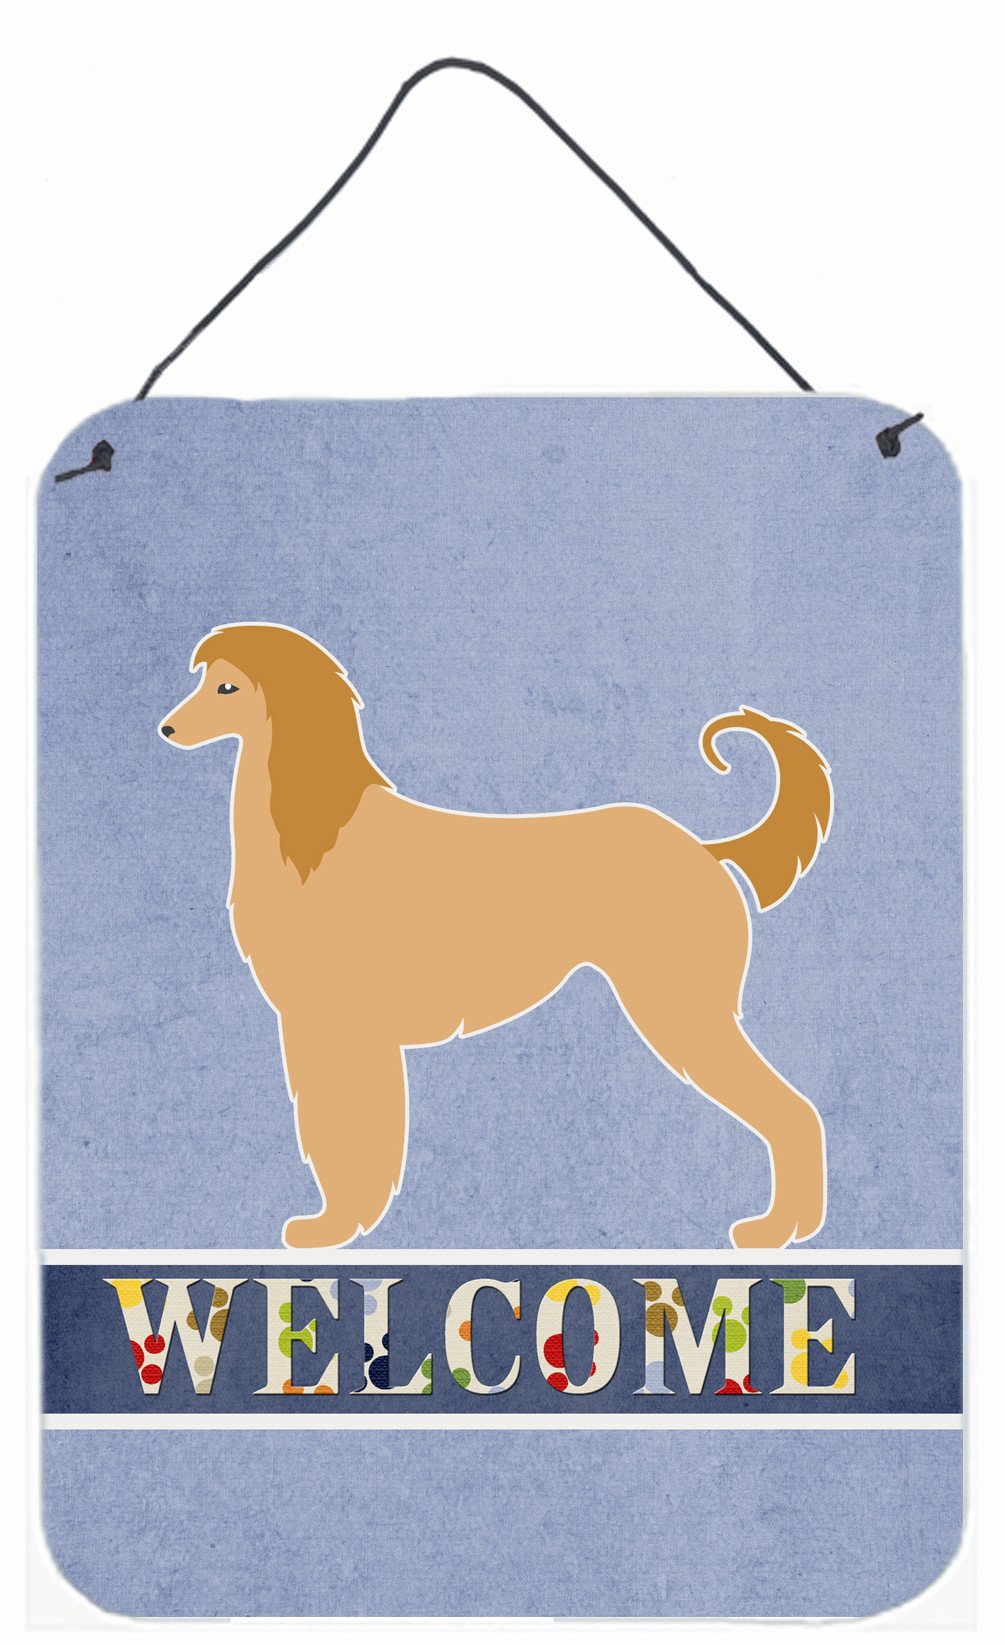 Afghan Hound Welcome Wall or Door Hanging Prints BB5510DS1216 by Caroline's Treasures